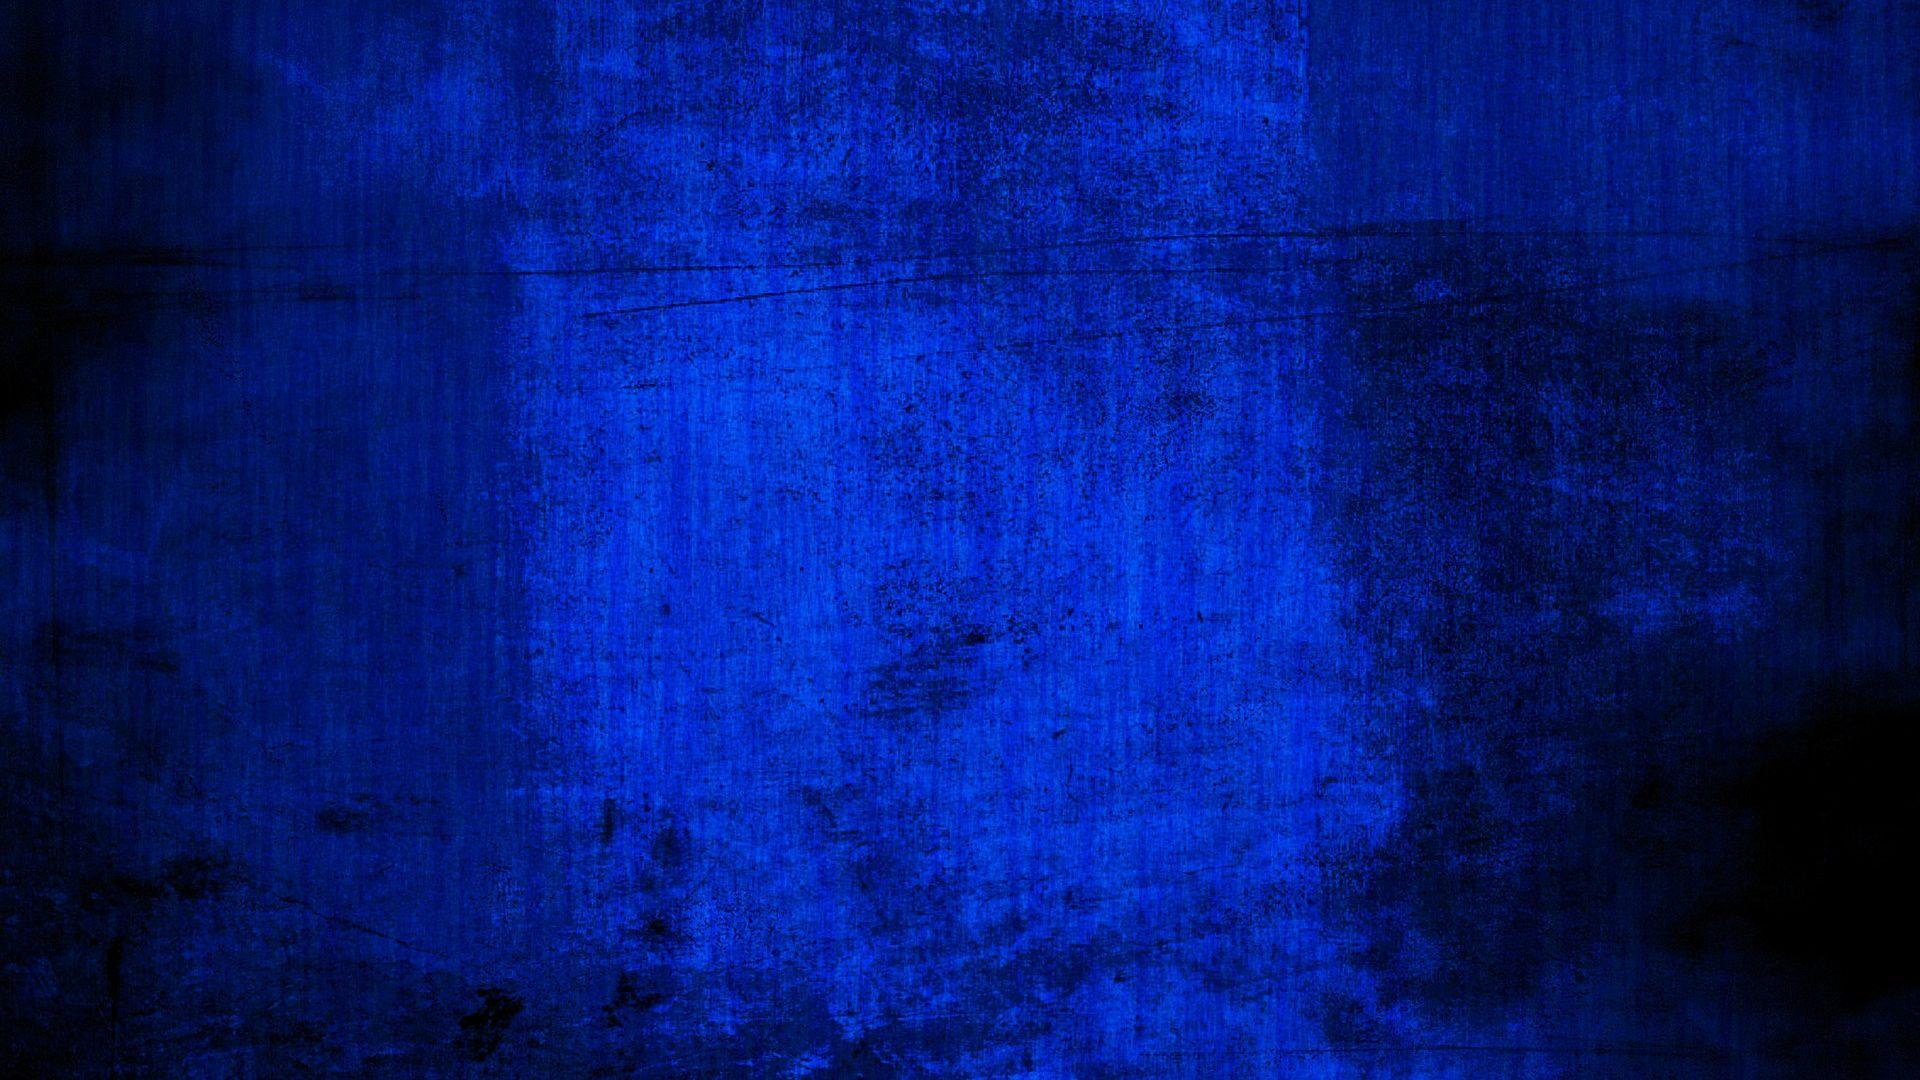 750+ Blue Texture Pictures | Download Free Images on Unsplash